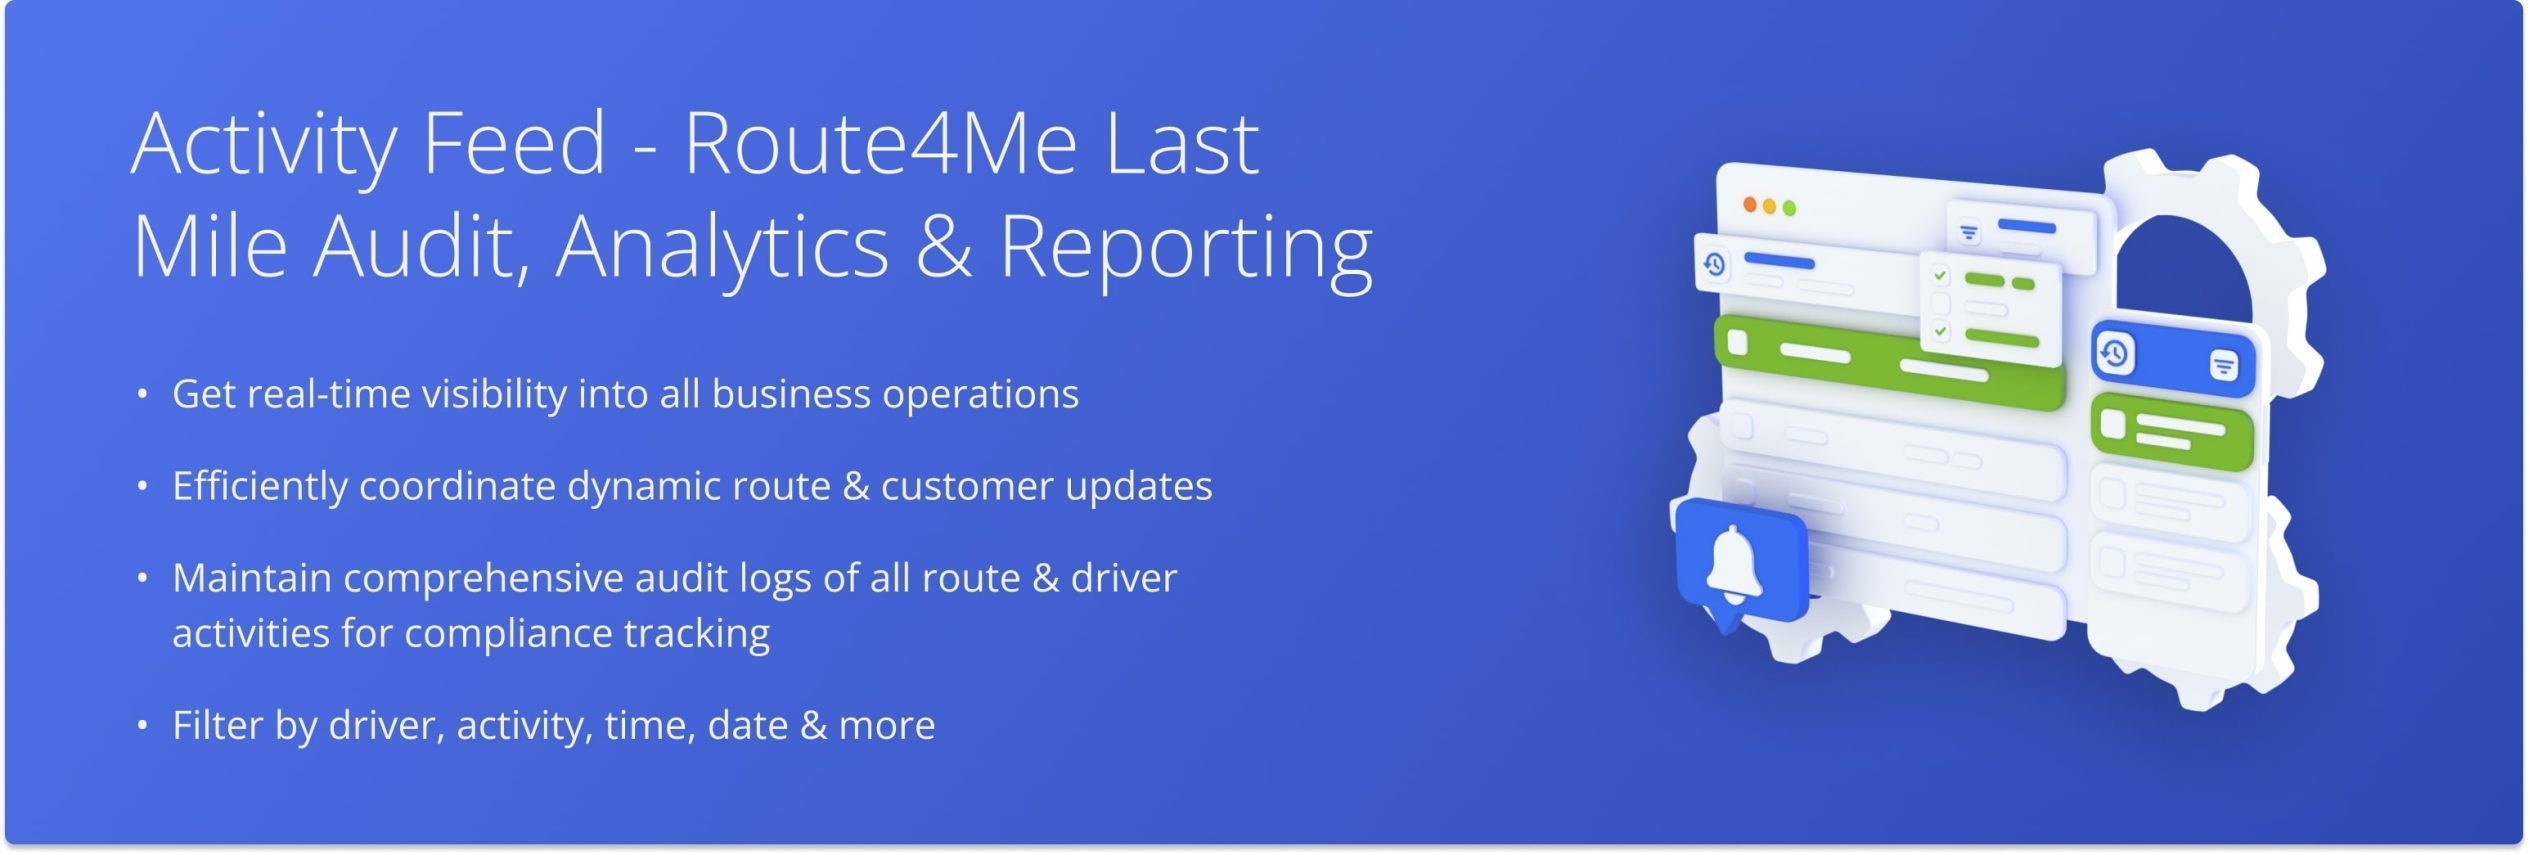 Route4Me's Activity Feed is a user-friendly and informative analytics and auditing tool. The Activity Feed enables you to assess and audit the performance of your entire team and view, filter, and download all events associated with your routes.